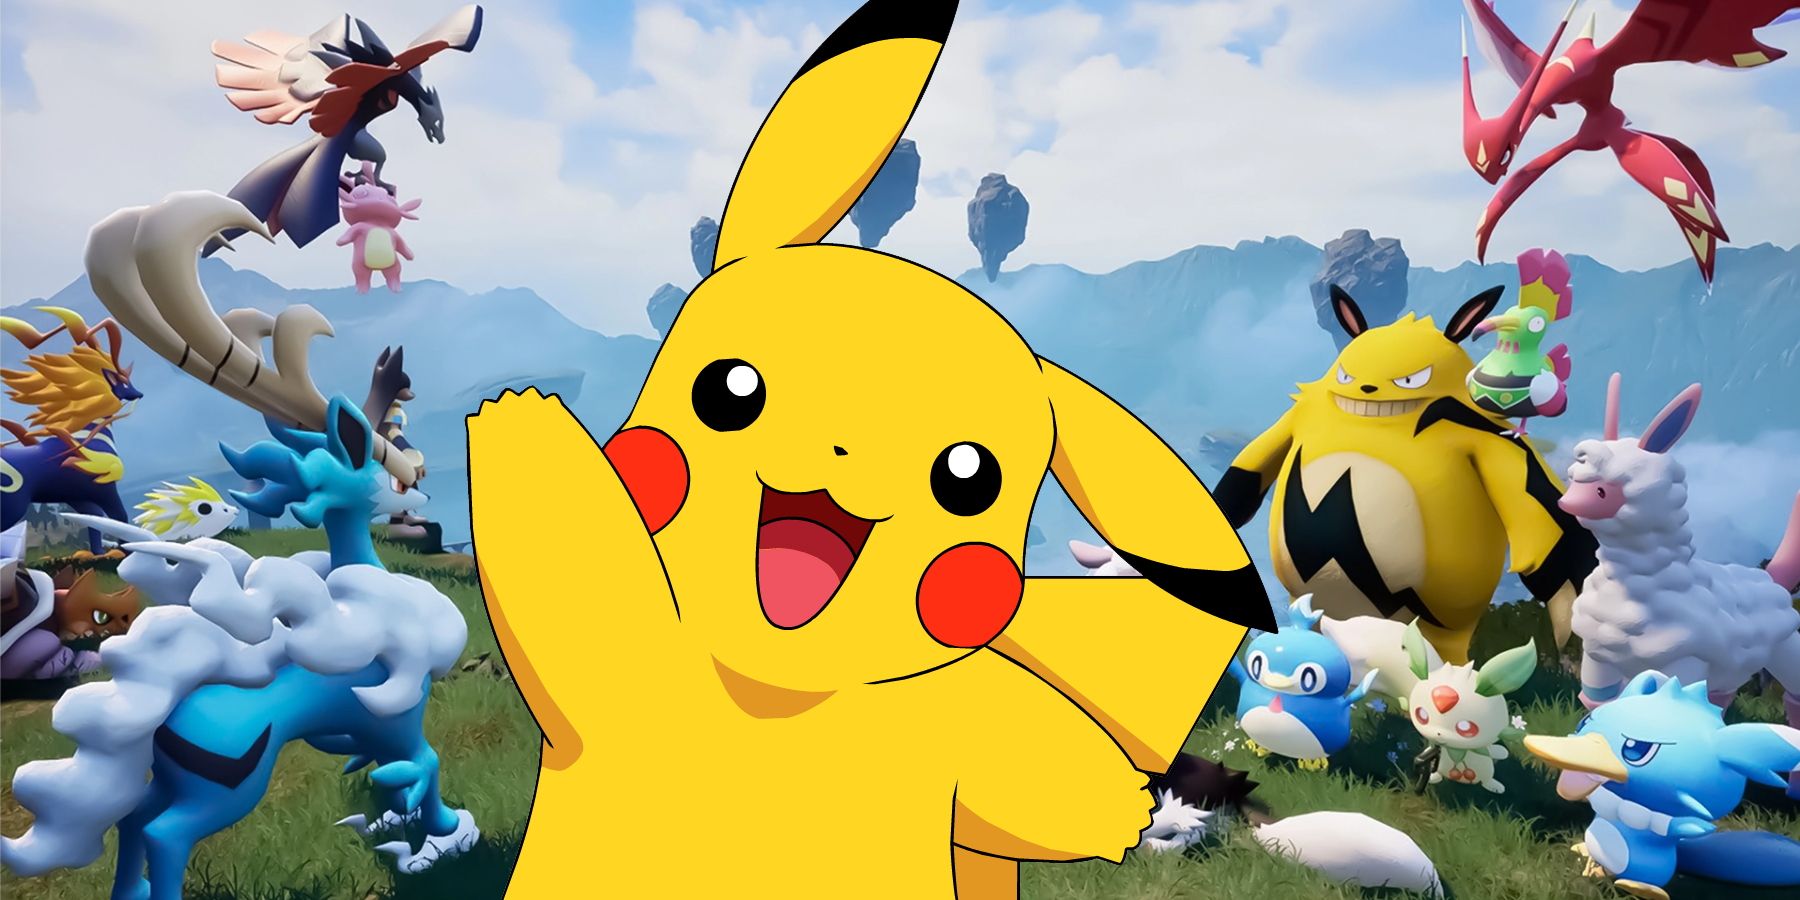 The key visual for Palworld overlayed with an image of Pokemon mascot Pikachu.